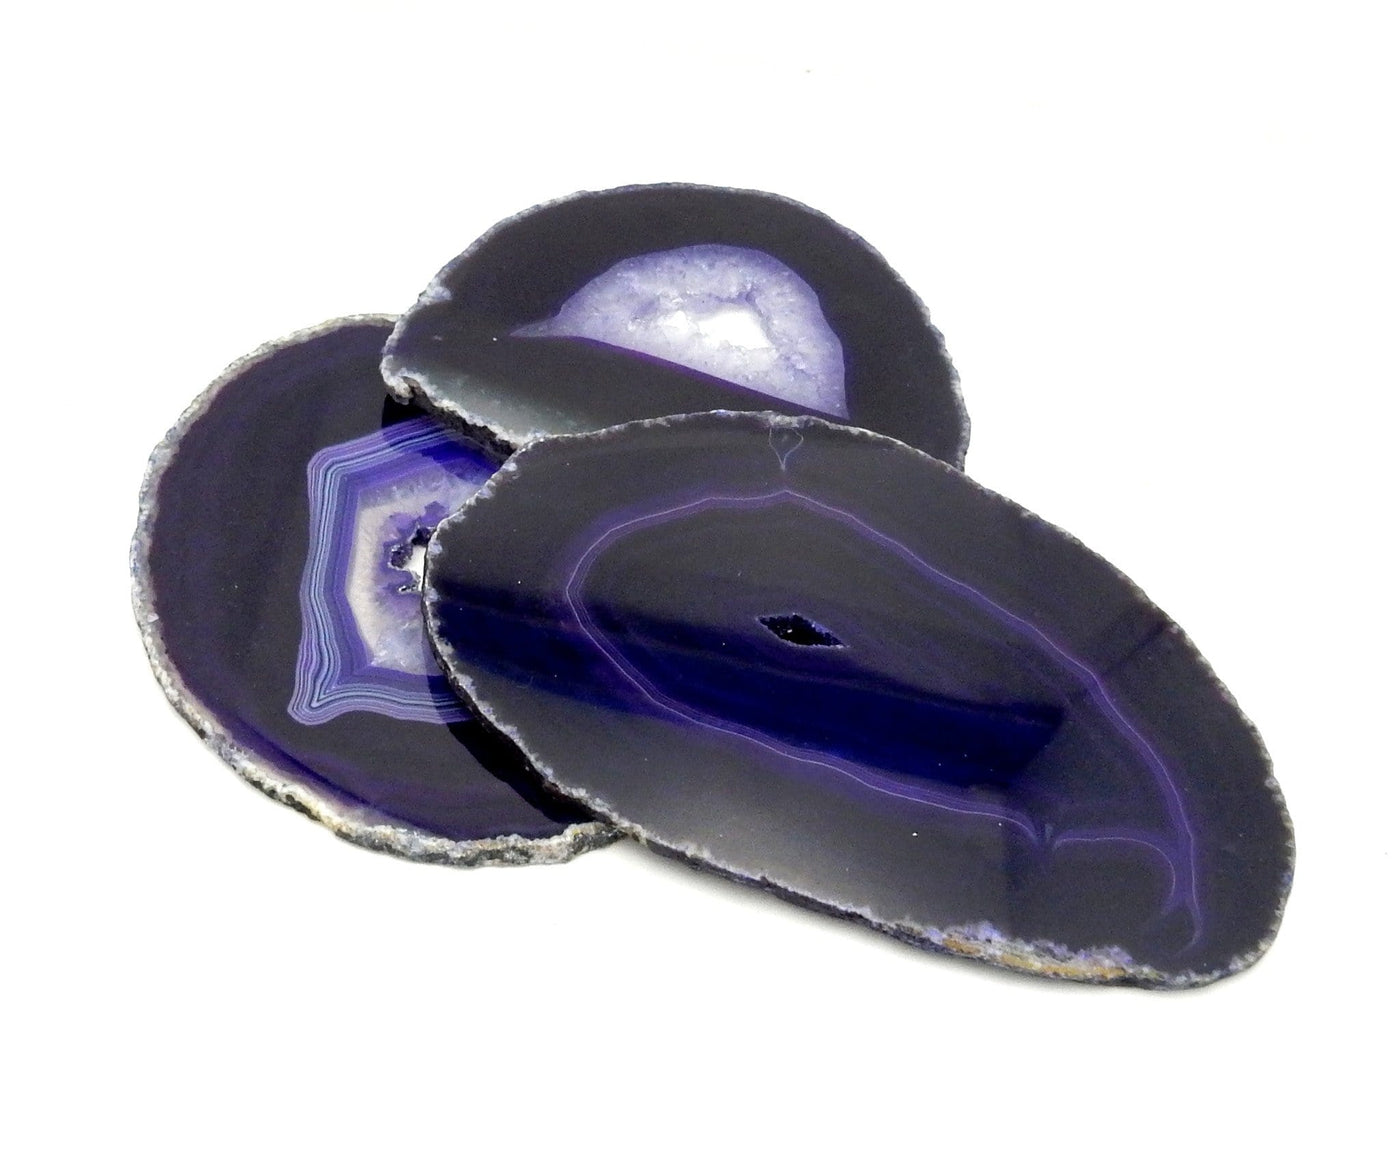 Purple Agate Slice - Agate Slices #5 size on a table